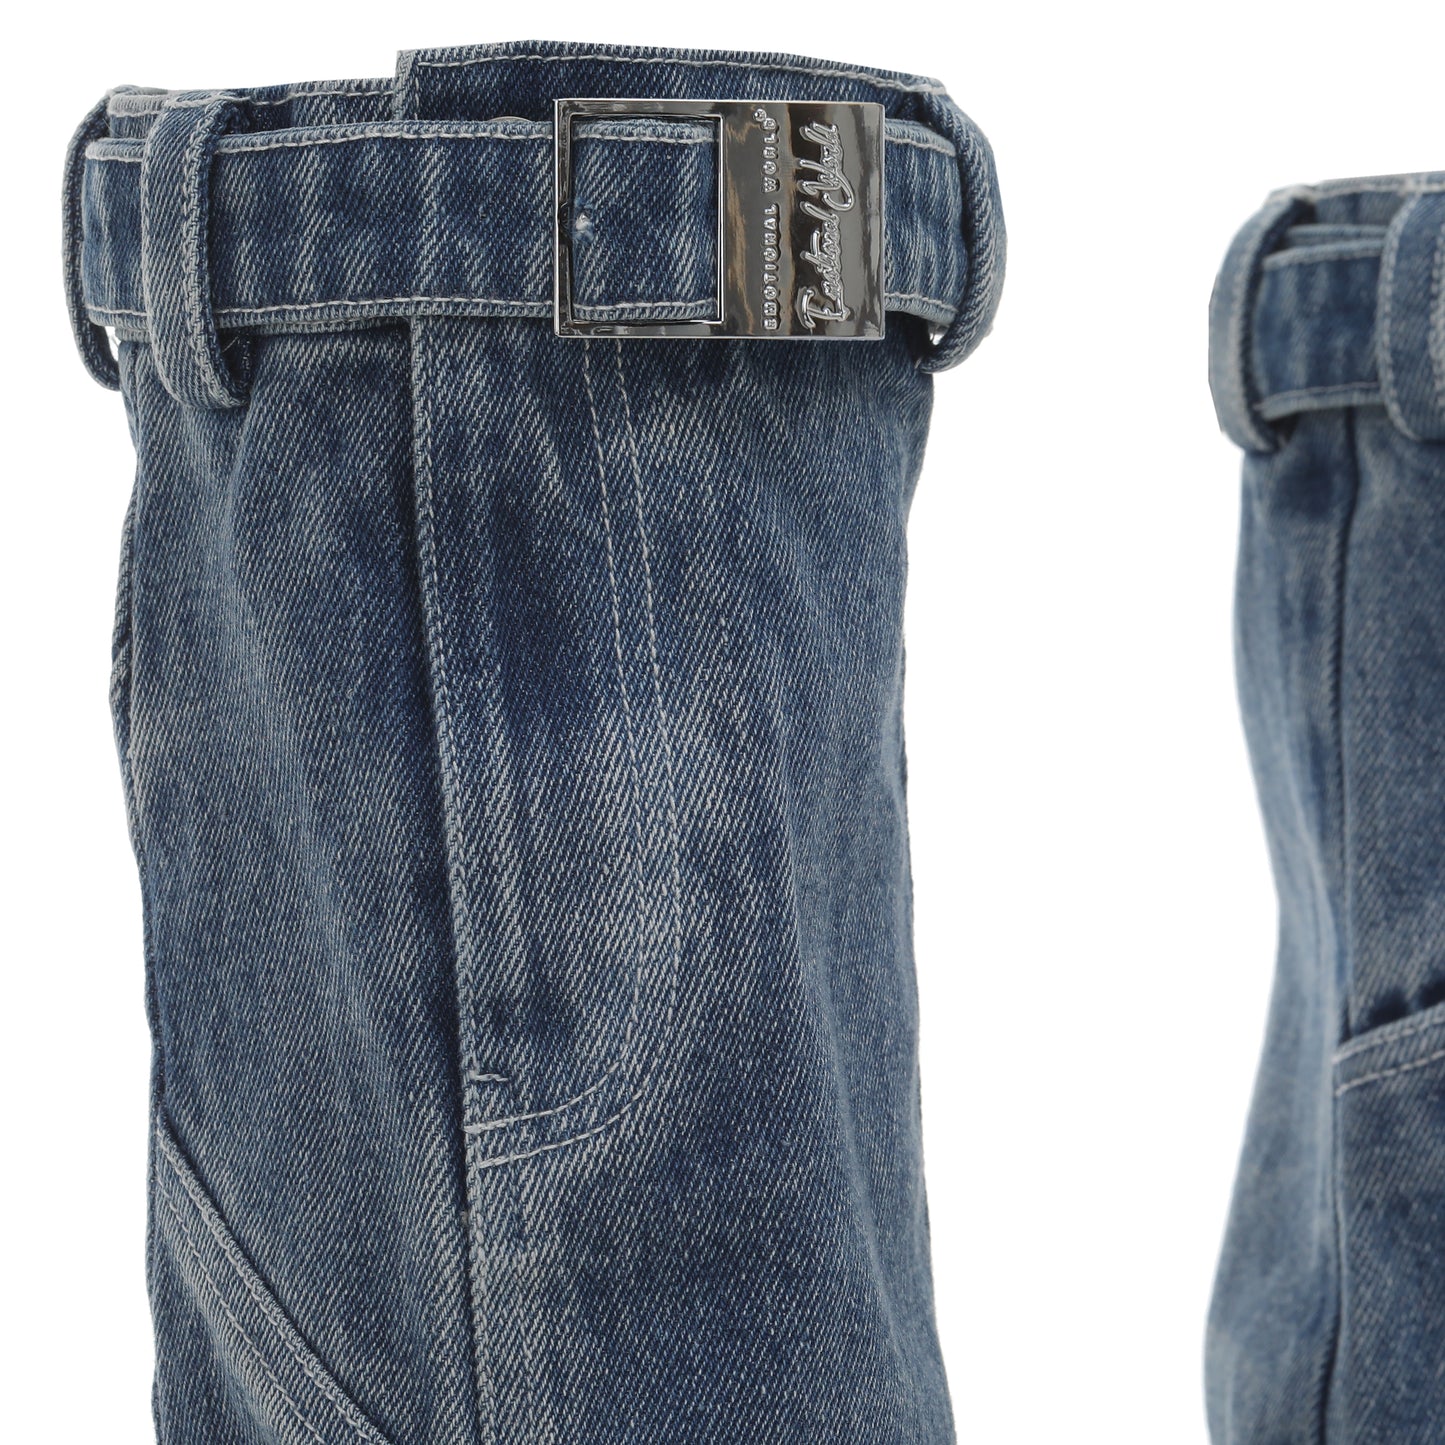 Washed Denim Strapped Leg Warmmers